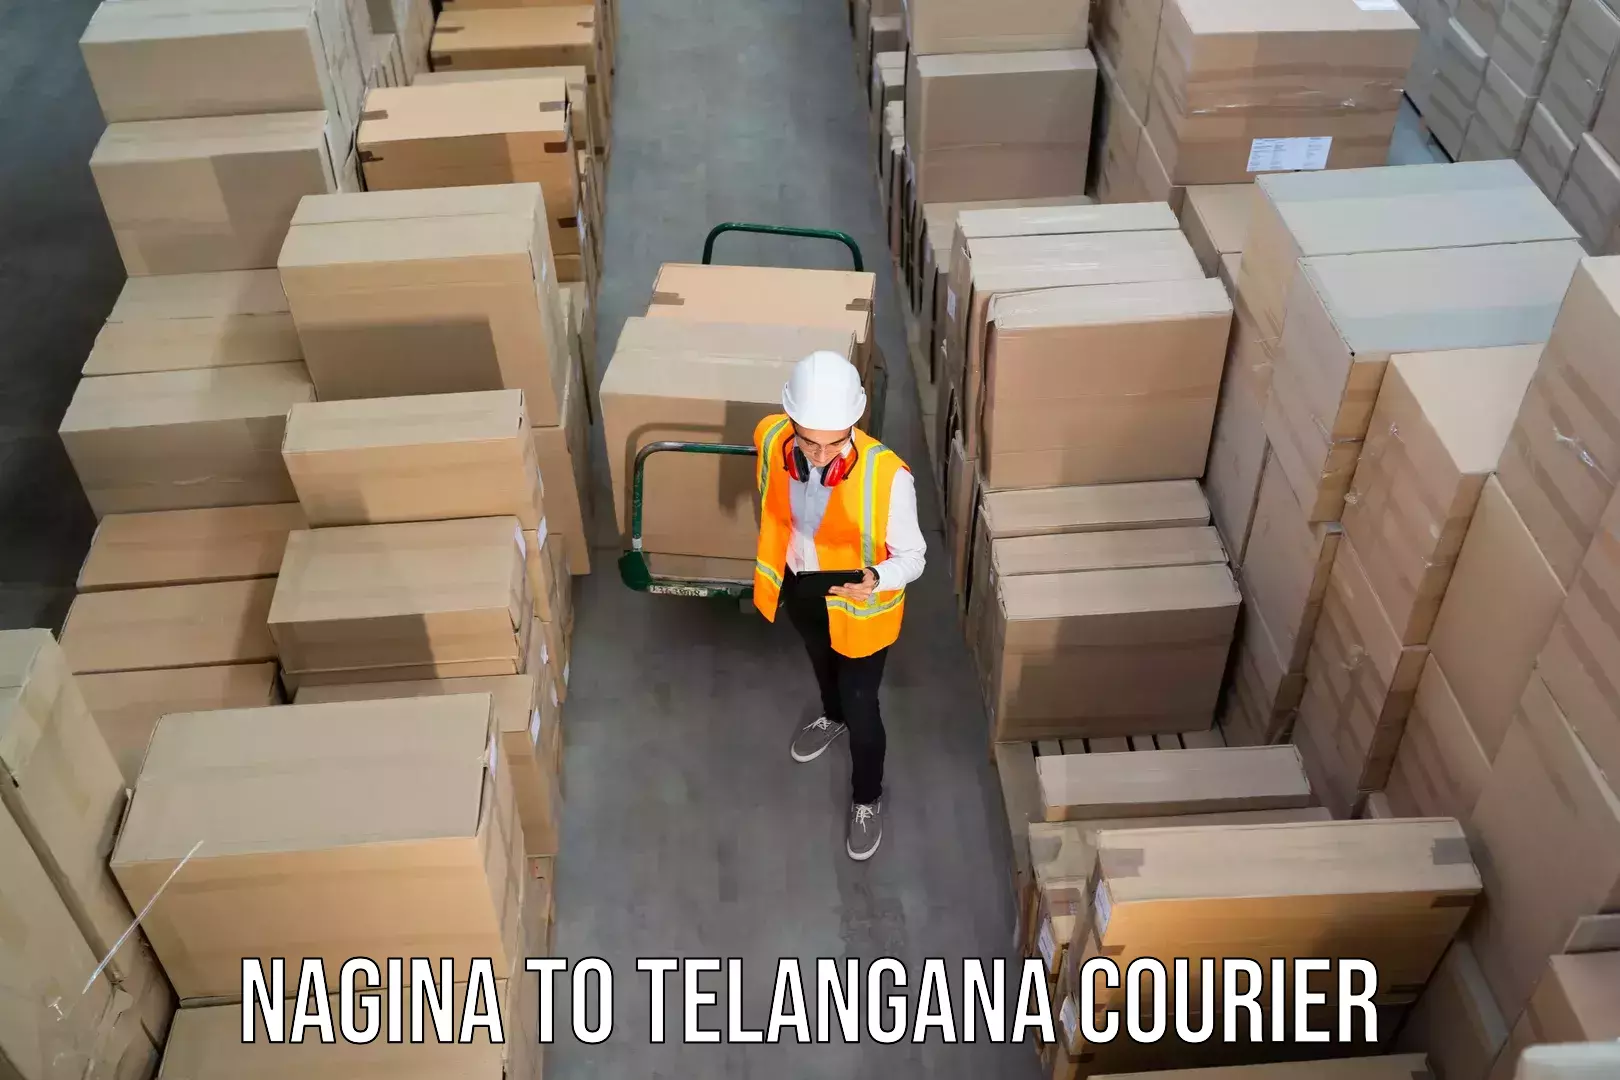 State-of-the-art courier technology Nagina to Secunderabad